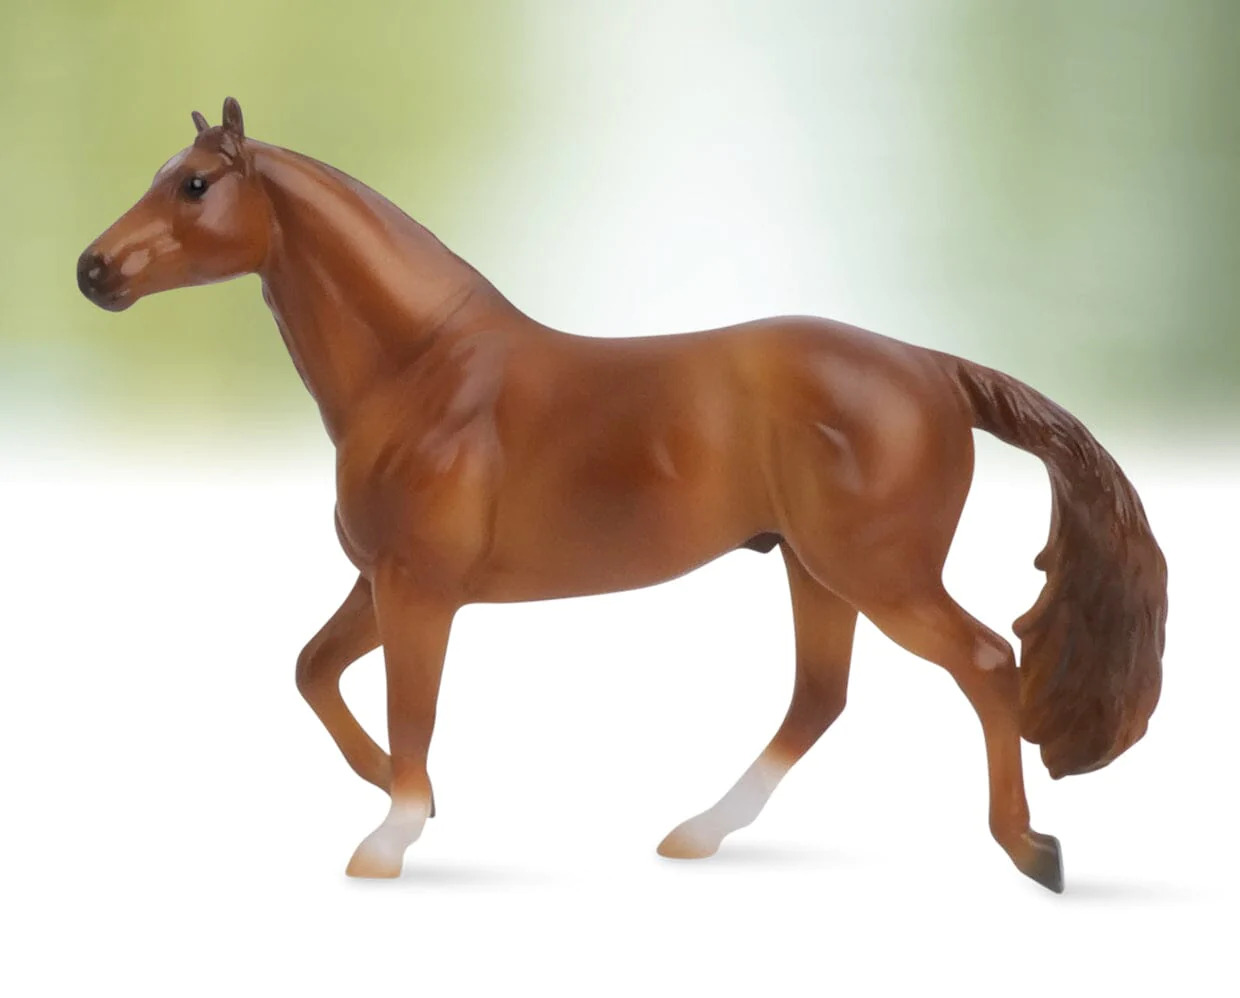 Breyer #6952 / #6957 Assorted Stablemates Horse Collection Series 2 Stablemate QH Chestnut Smart Chic Olena